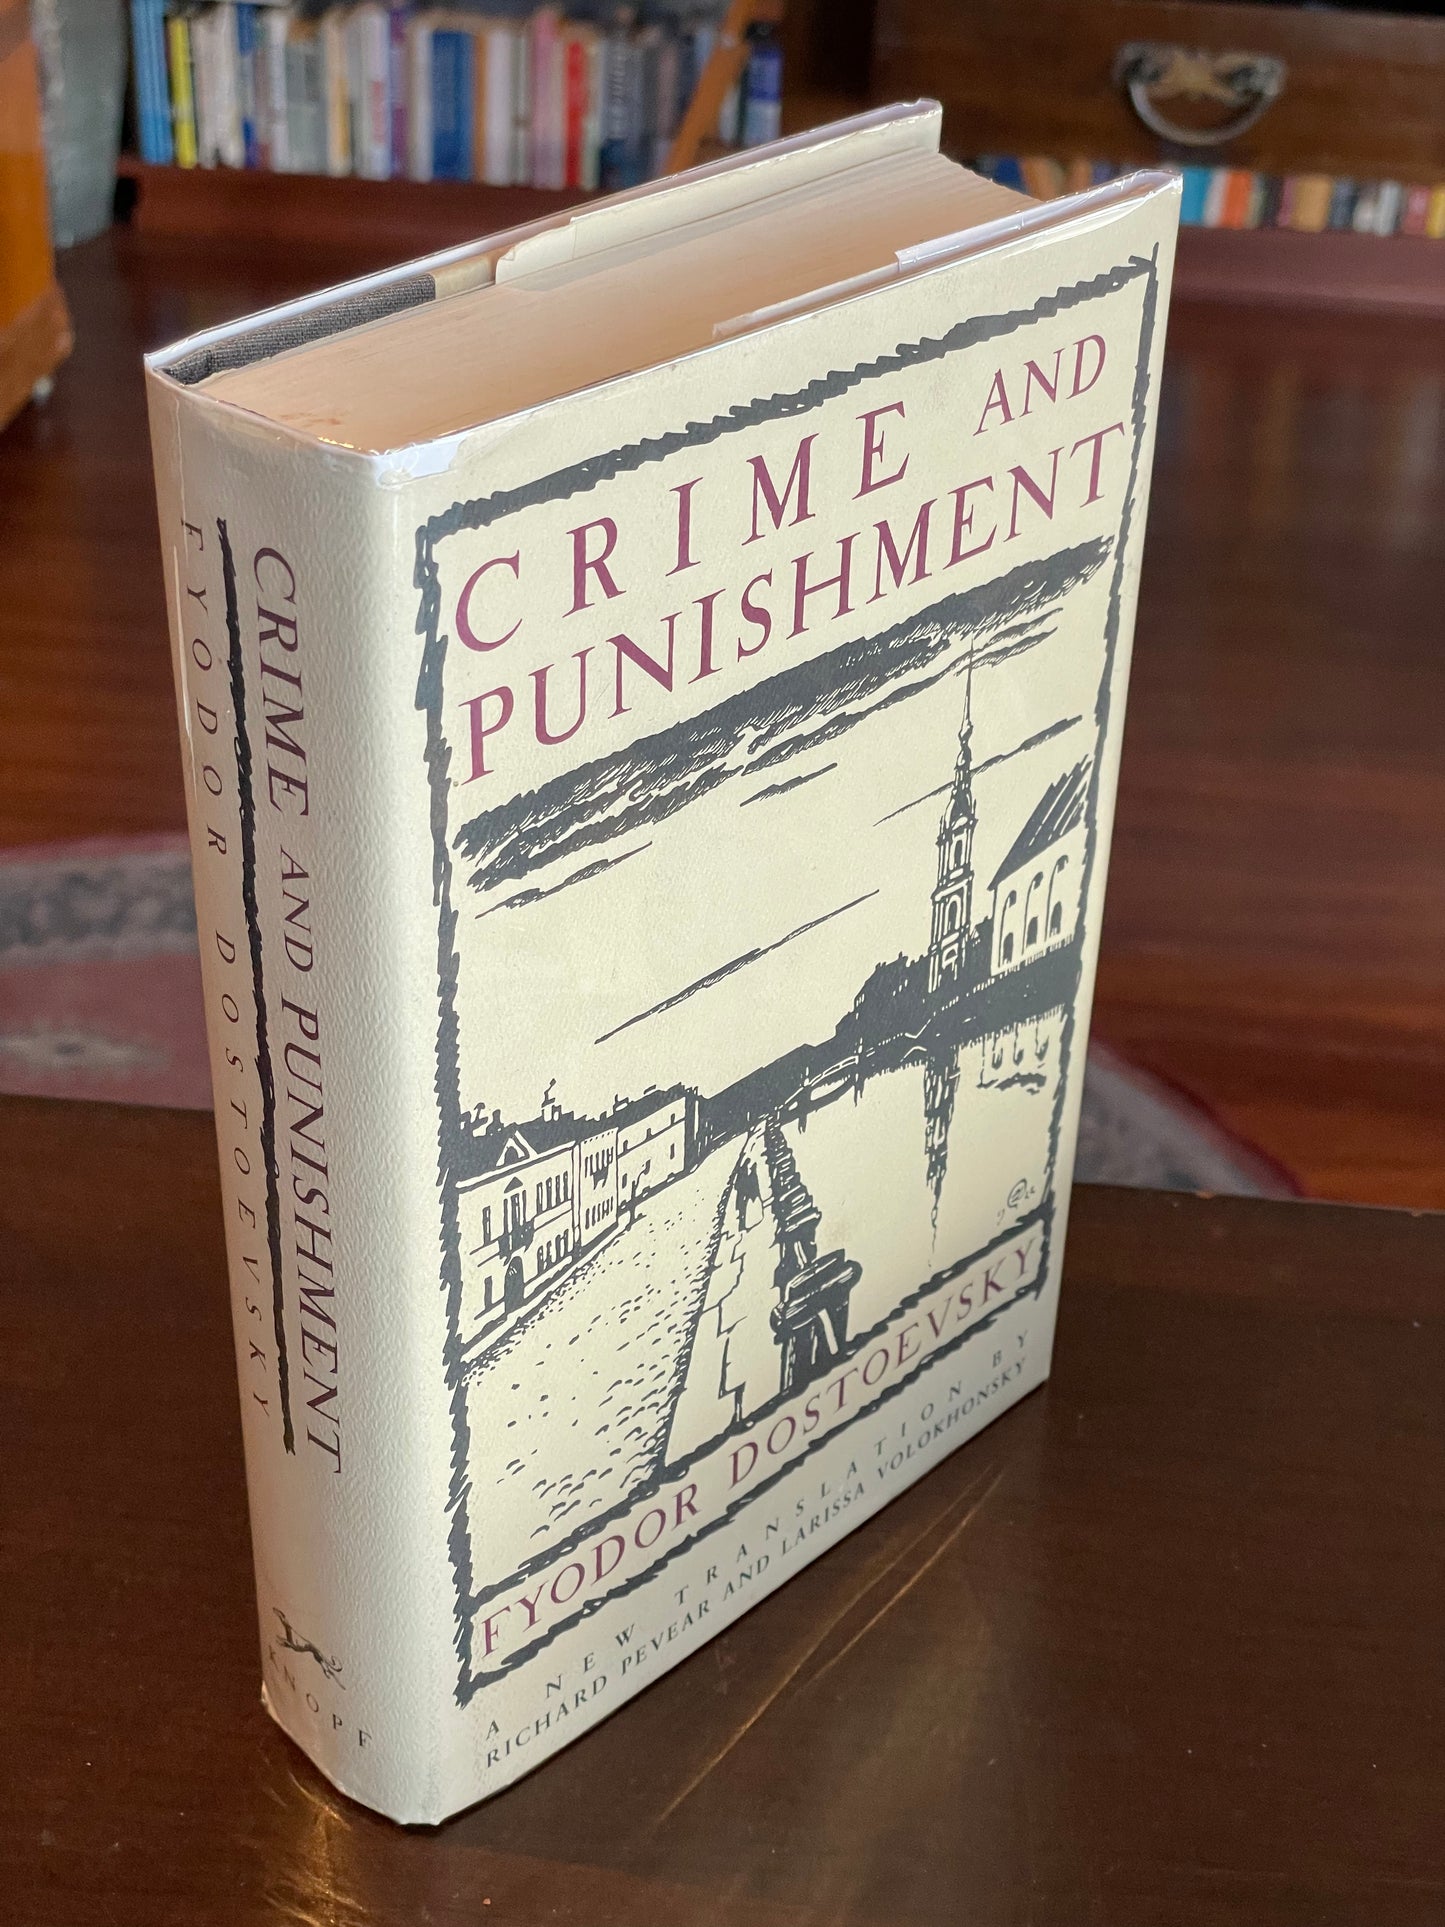 Crime and Punishment by Fyodor Dostoyevsky (Book Club Edition)